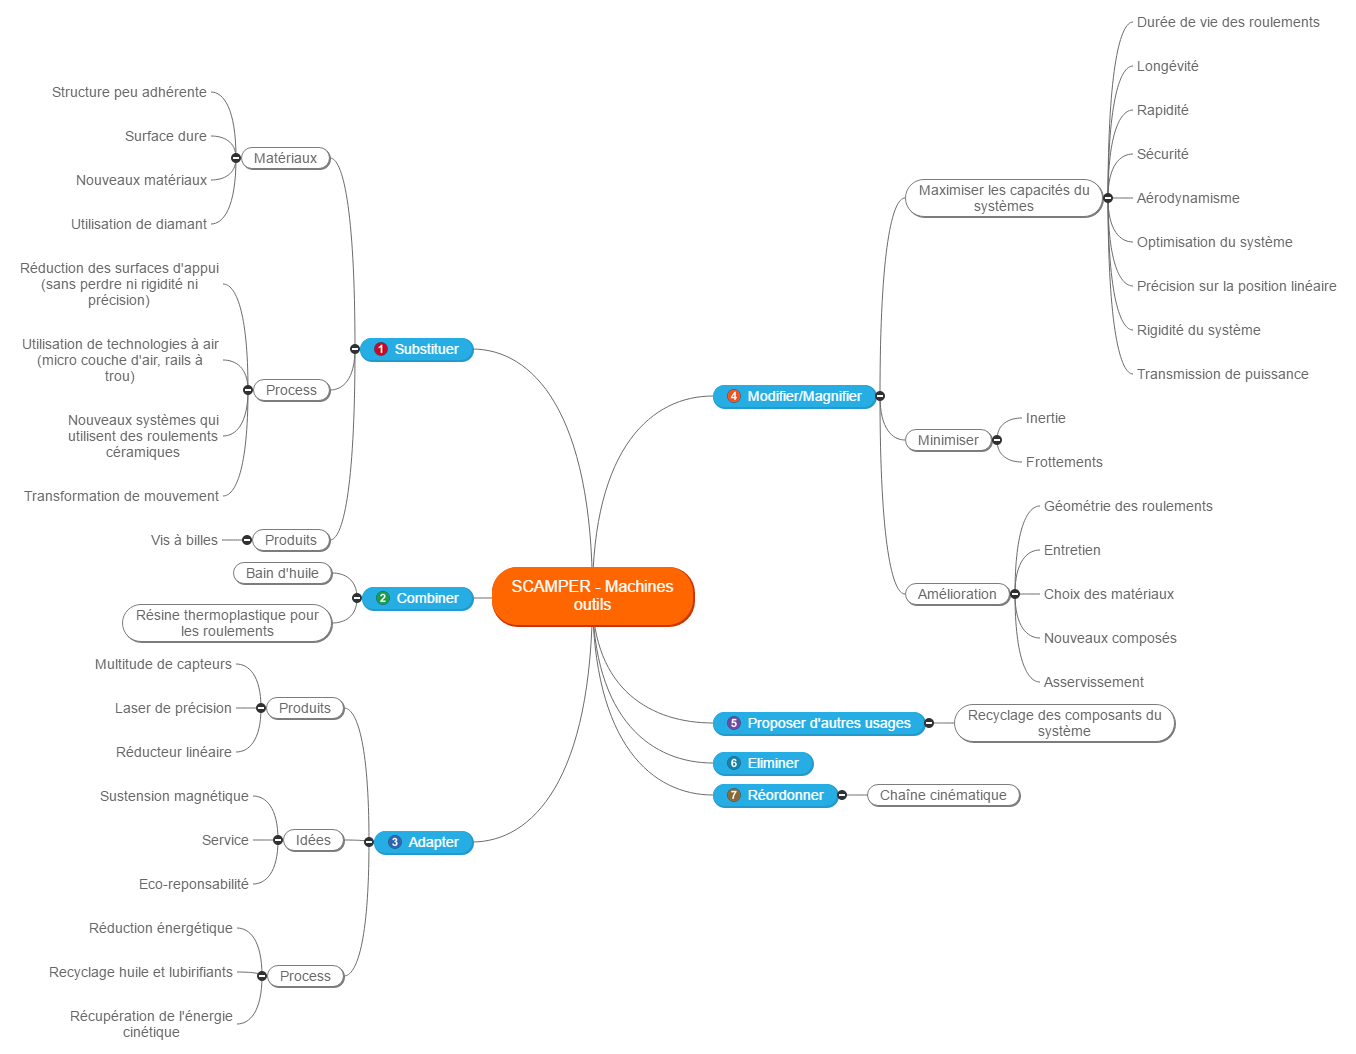 SCAMPER machines outils Mind Maps